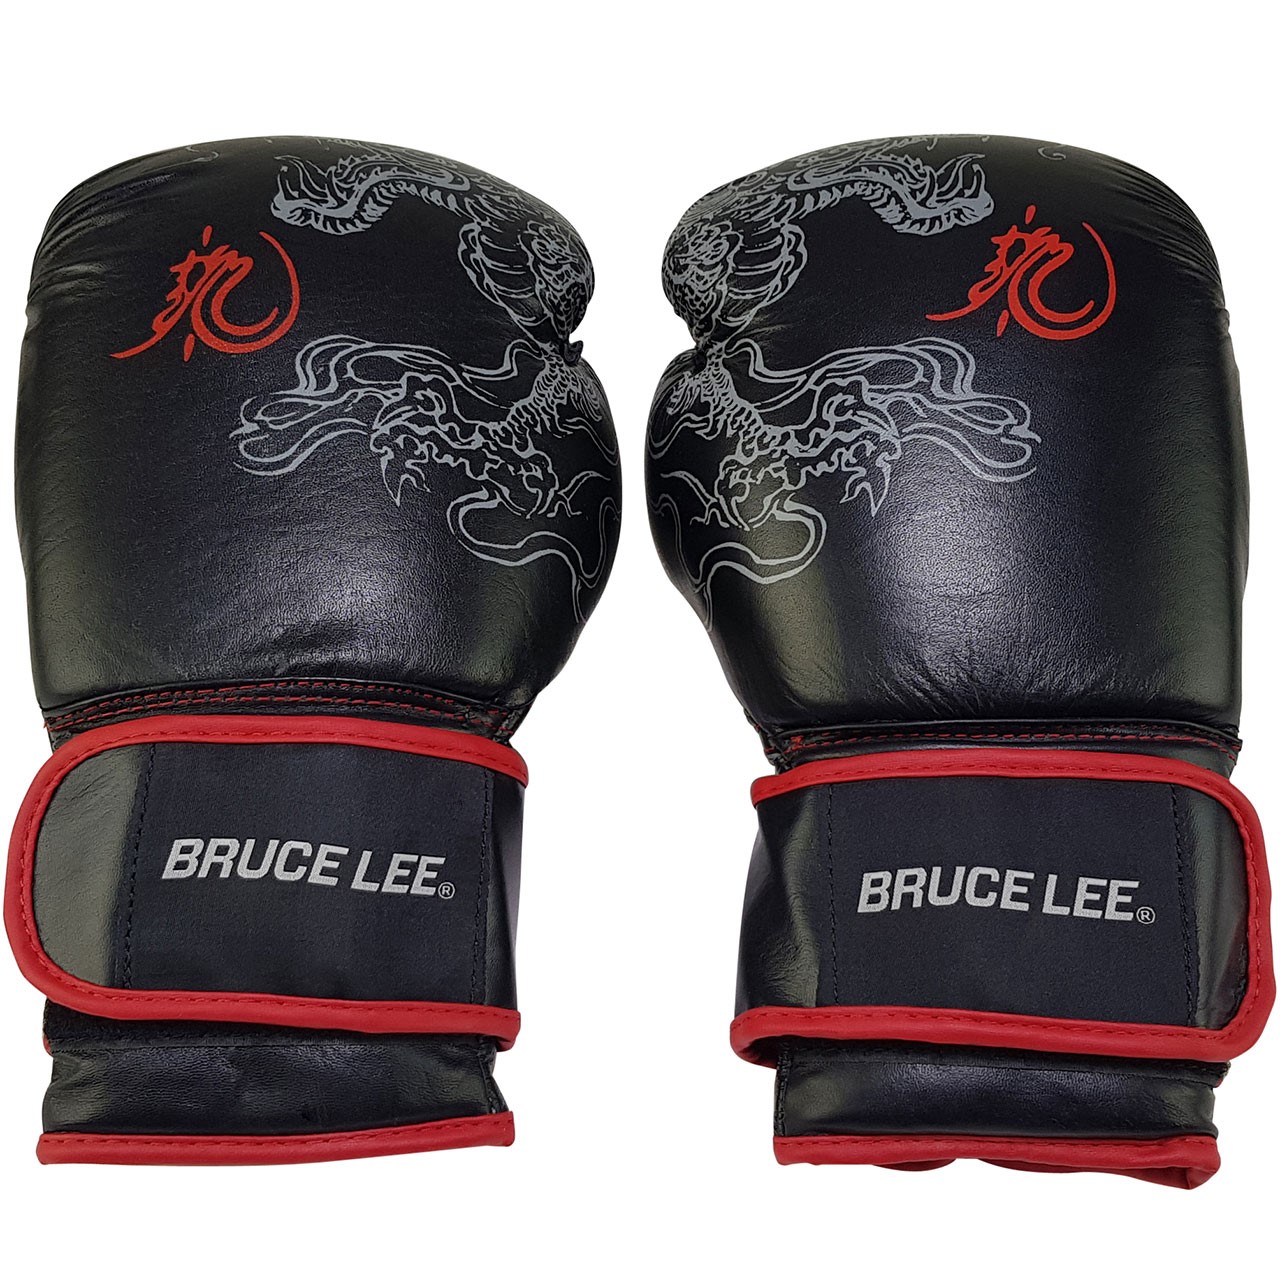 Bruce Lee Deluxe Boxing Gloves